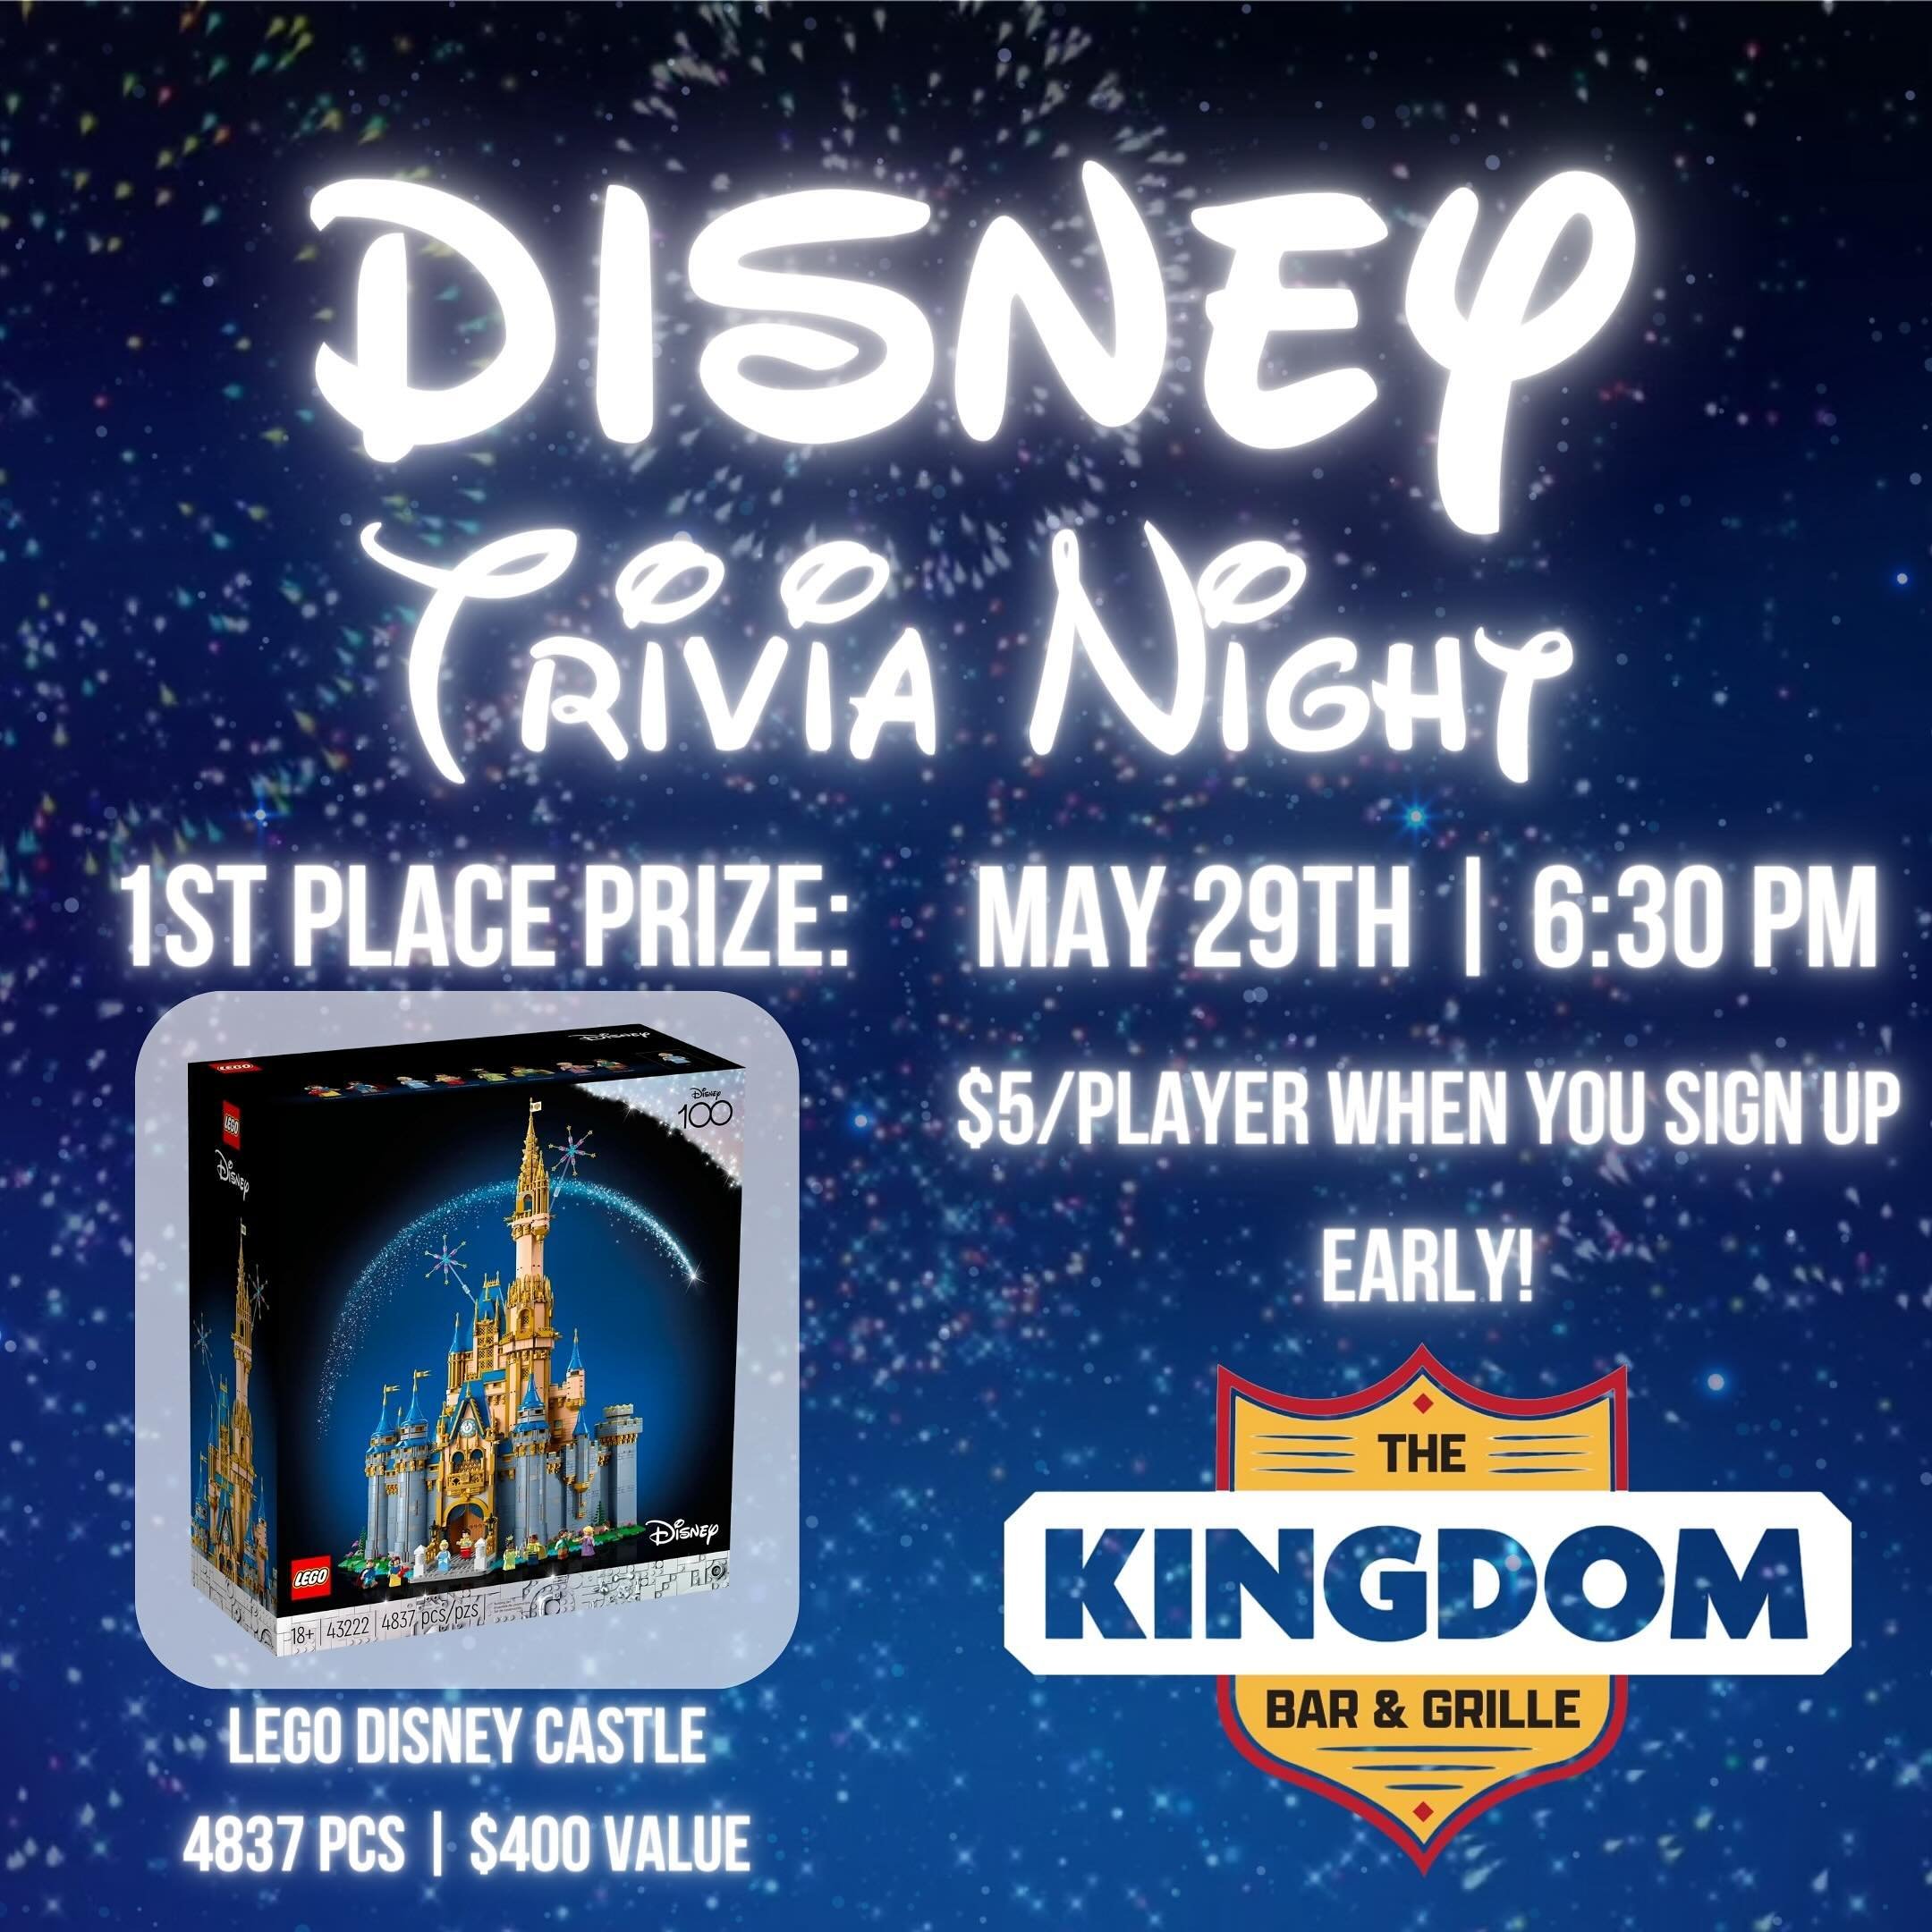 PRIZE ALERT: LEGO Disney Castle - $400 Value!

Sign up now for Disney Trivia at The Kingdom Bar and Grille and save 50% on your tickets!